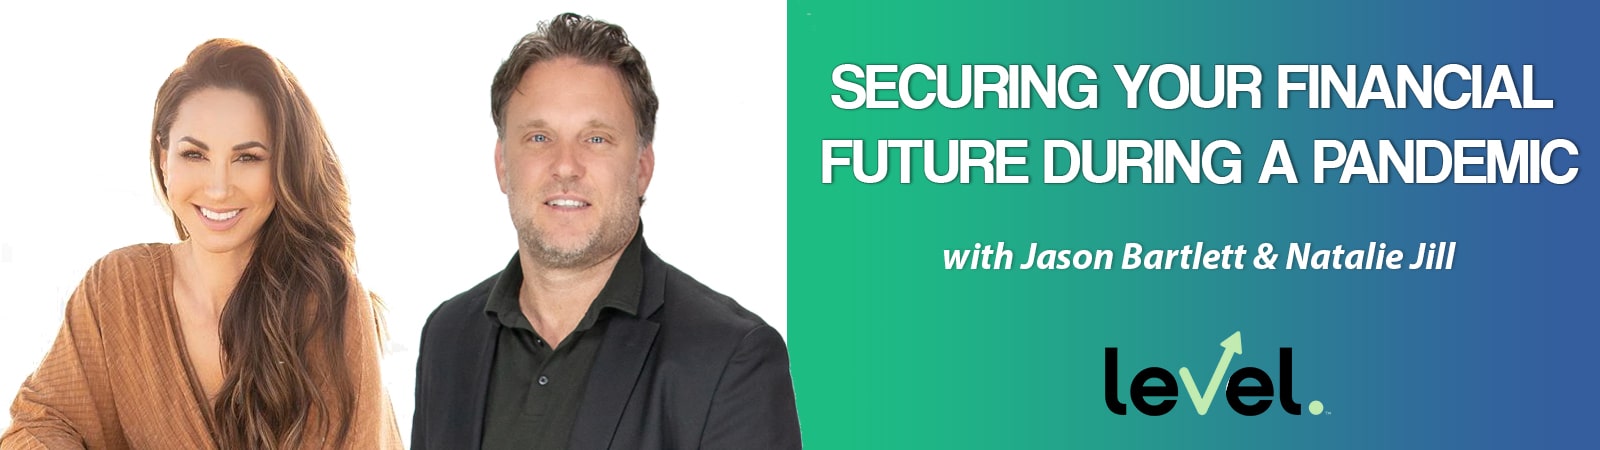 Financial Future During a Pandemic with Jason Bartlett